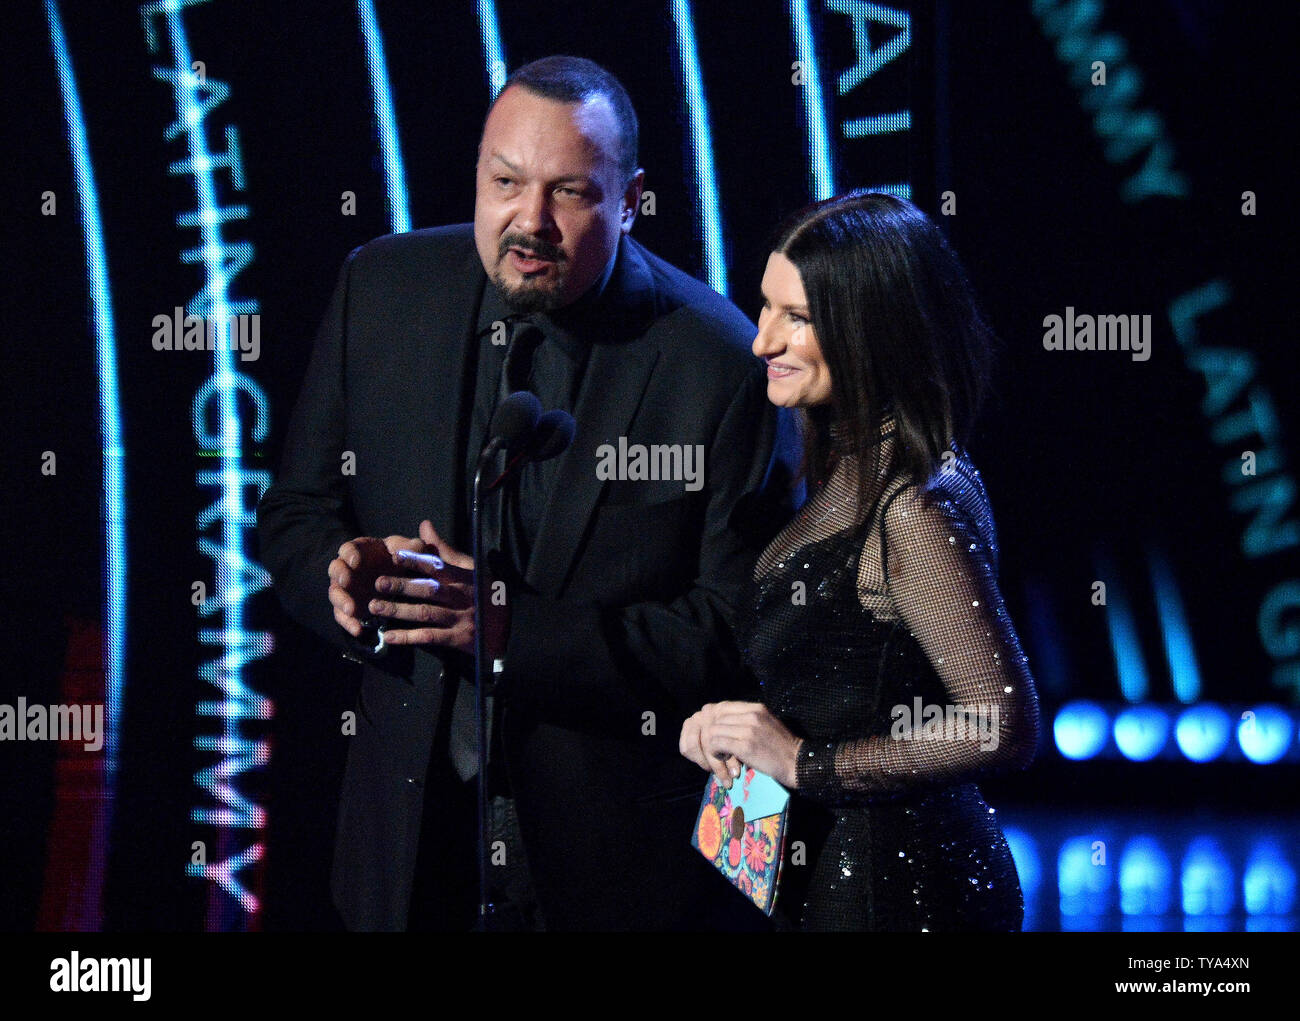 Presenters Pepe Aguilar and Laura Pausini speak onstage during the 19th annual Latin Grammy Awards at the MGM Garden Arena in Las Vegas, Nevada on November 15, 2018. Photo by Jim Ruymen/UPI Stock Photo